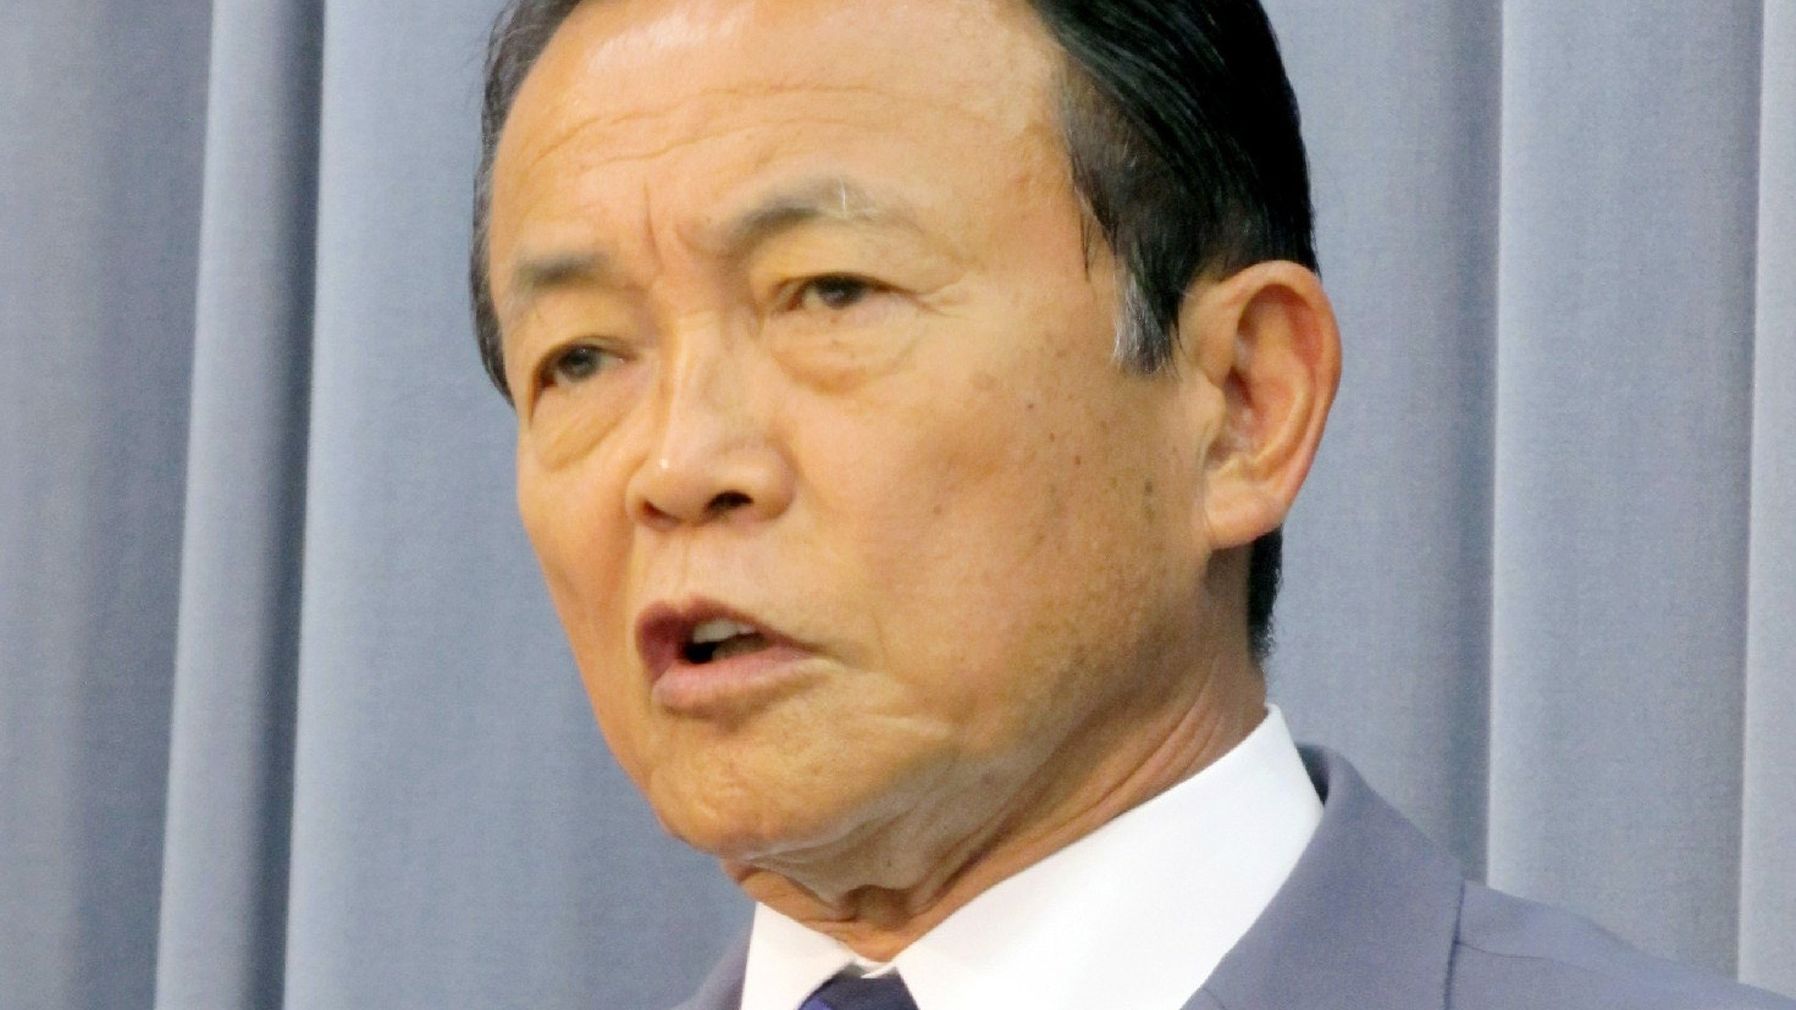 Japanese Deputy Prime Minister and Finance Minister Taro Aso at a cabinet meeting at Aso's office in Tokyo on August 2, 2013.